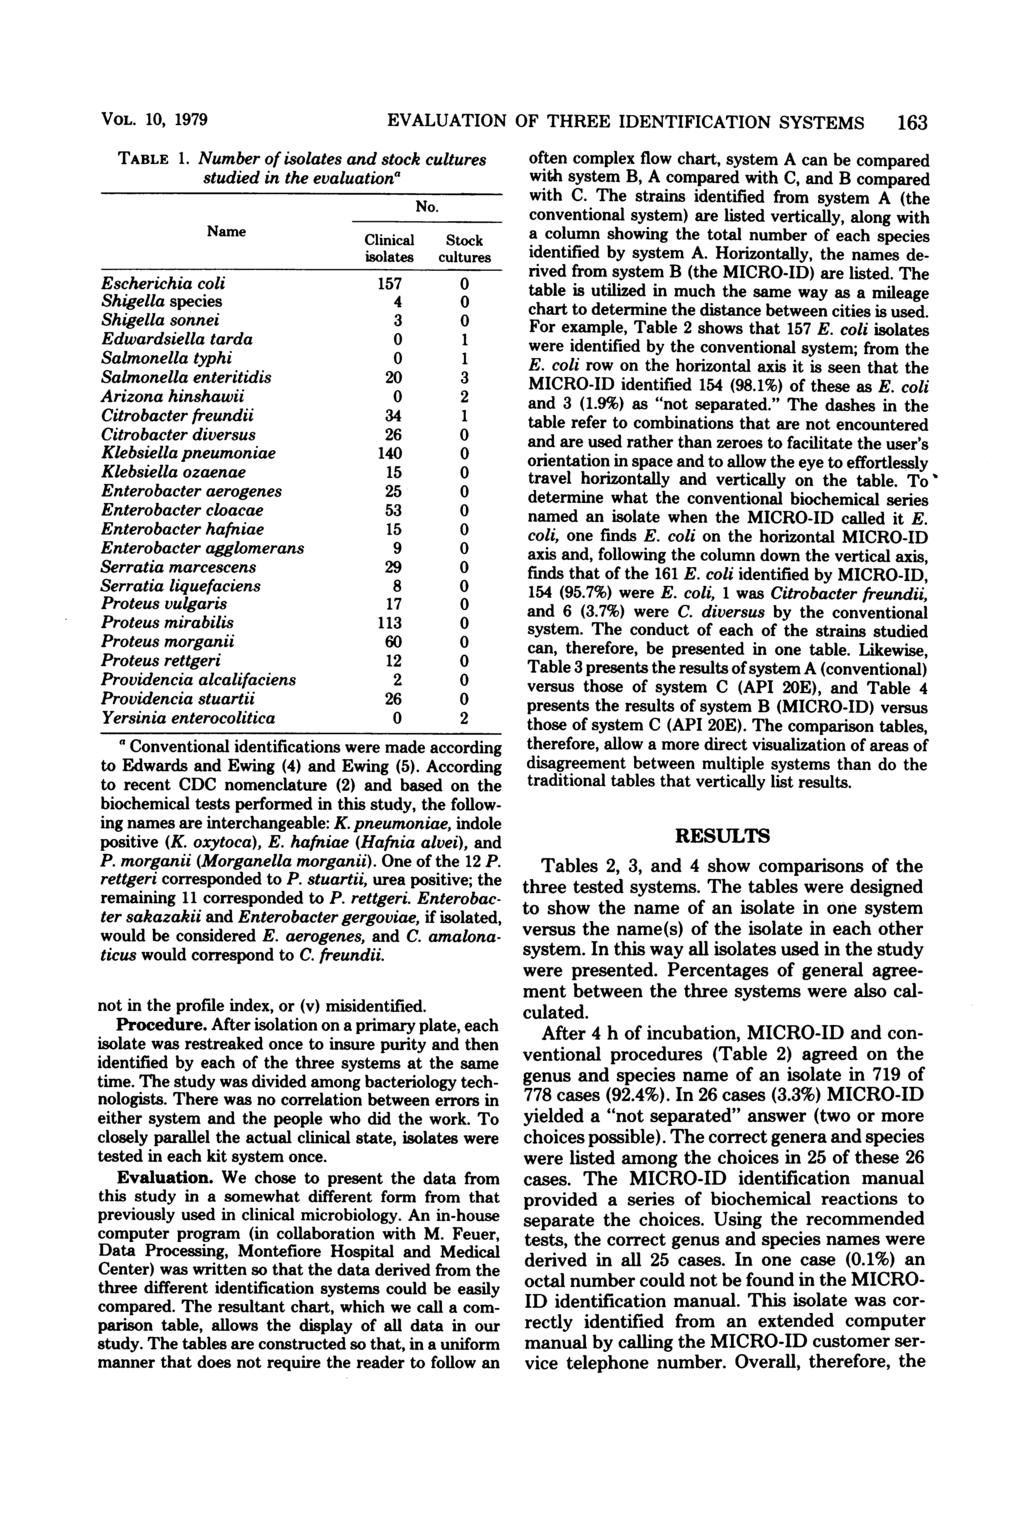 VOL. 1, 1979 TABLE 1. Number of isolates and stock cultures studied in the evaluationa No.